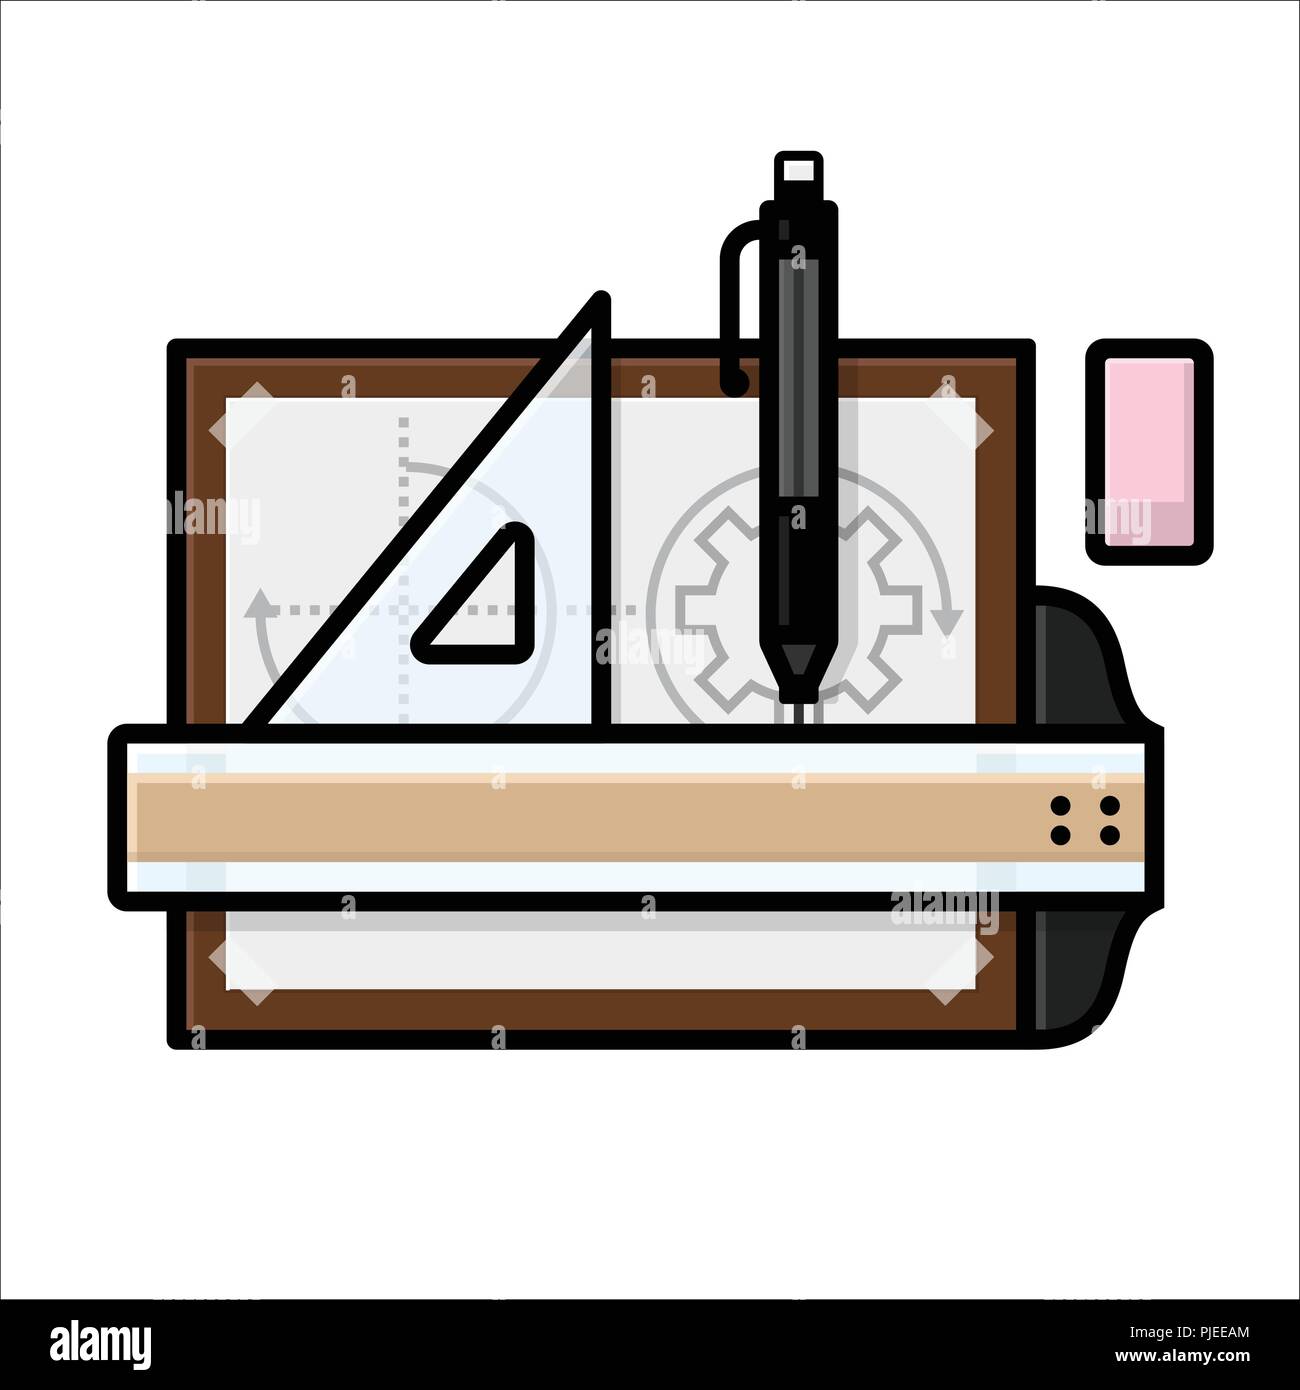 Drafting Tools Stock Illustration - Download Image Now - Work Tool,  T-Square, Protractor - iStock